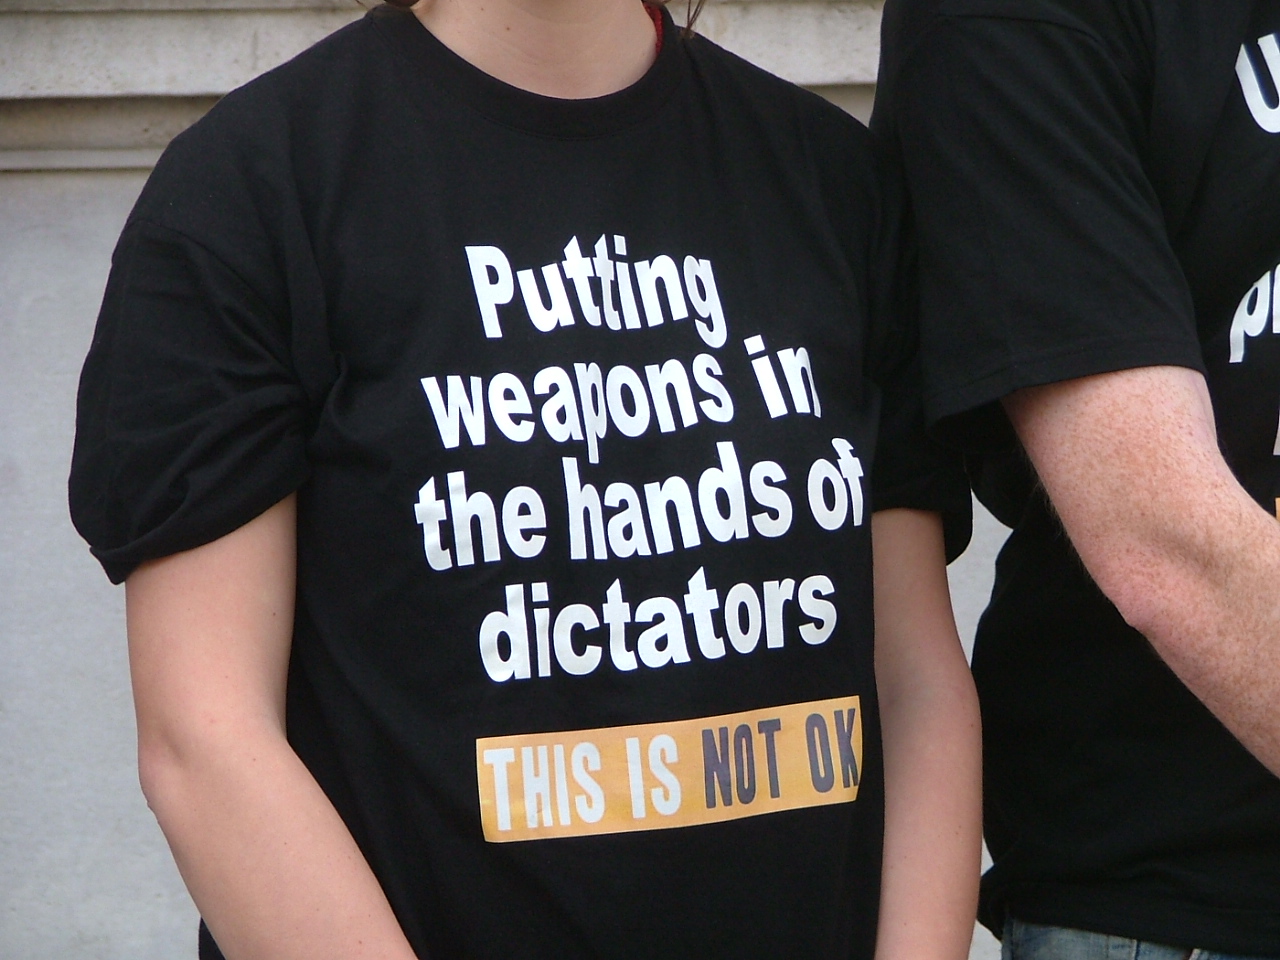 This is not OK - teeshirt of petitioner at Downing Street, 9 March 2011